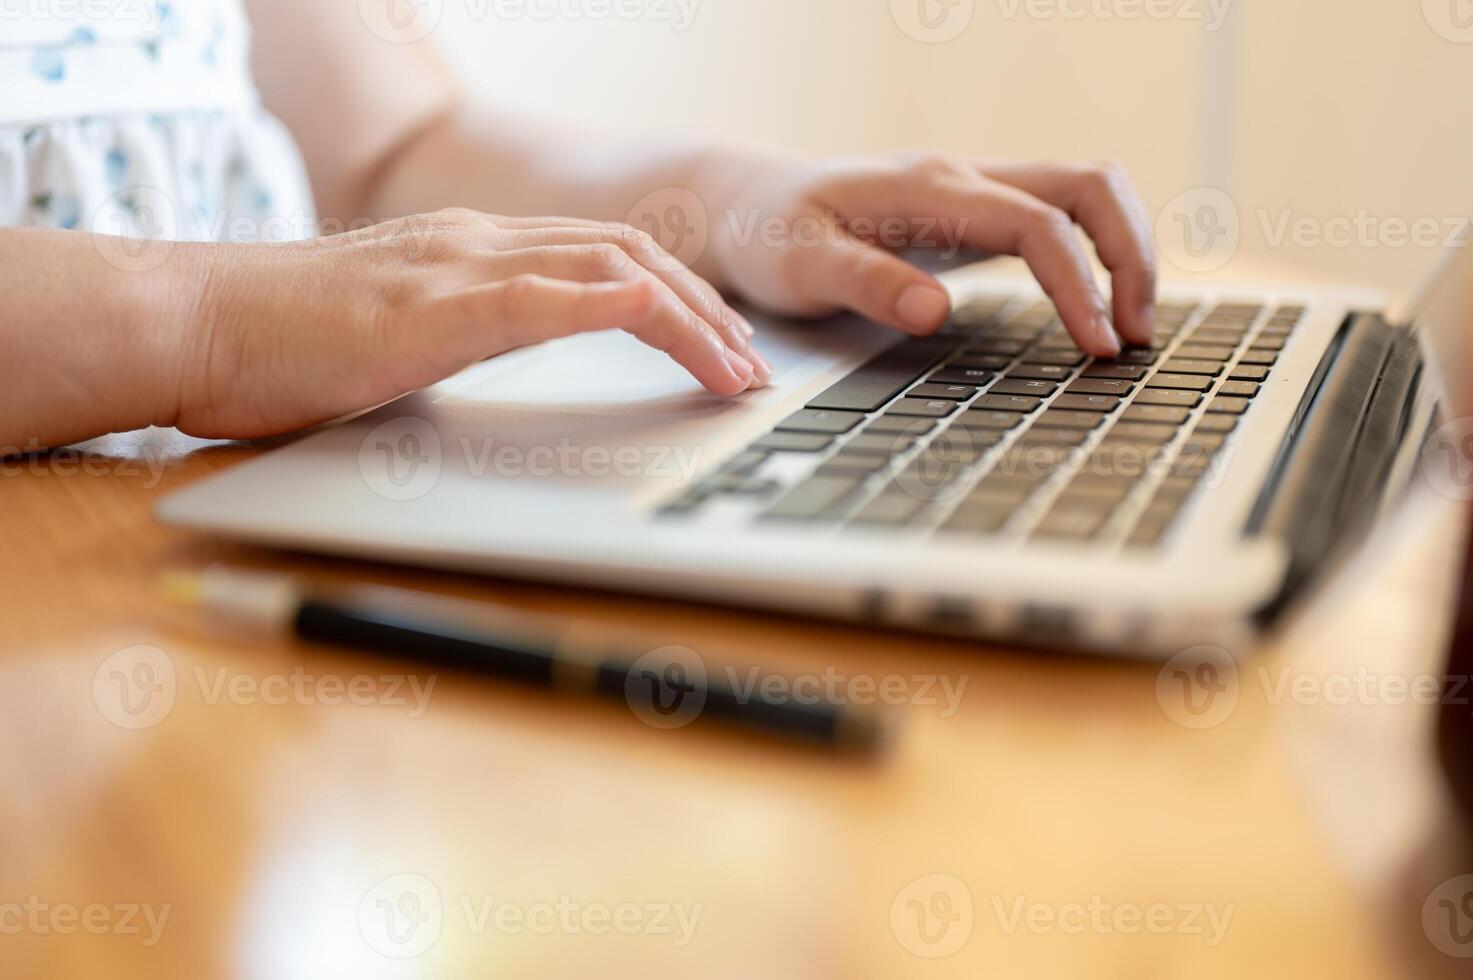 A close-up image of a woman using her laptop at a table indoors, typing on the laptop keyboard. photo